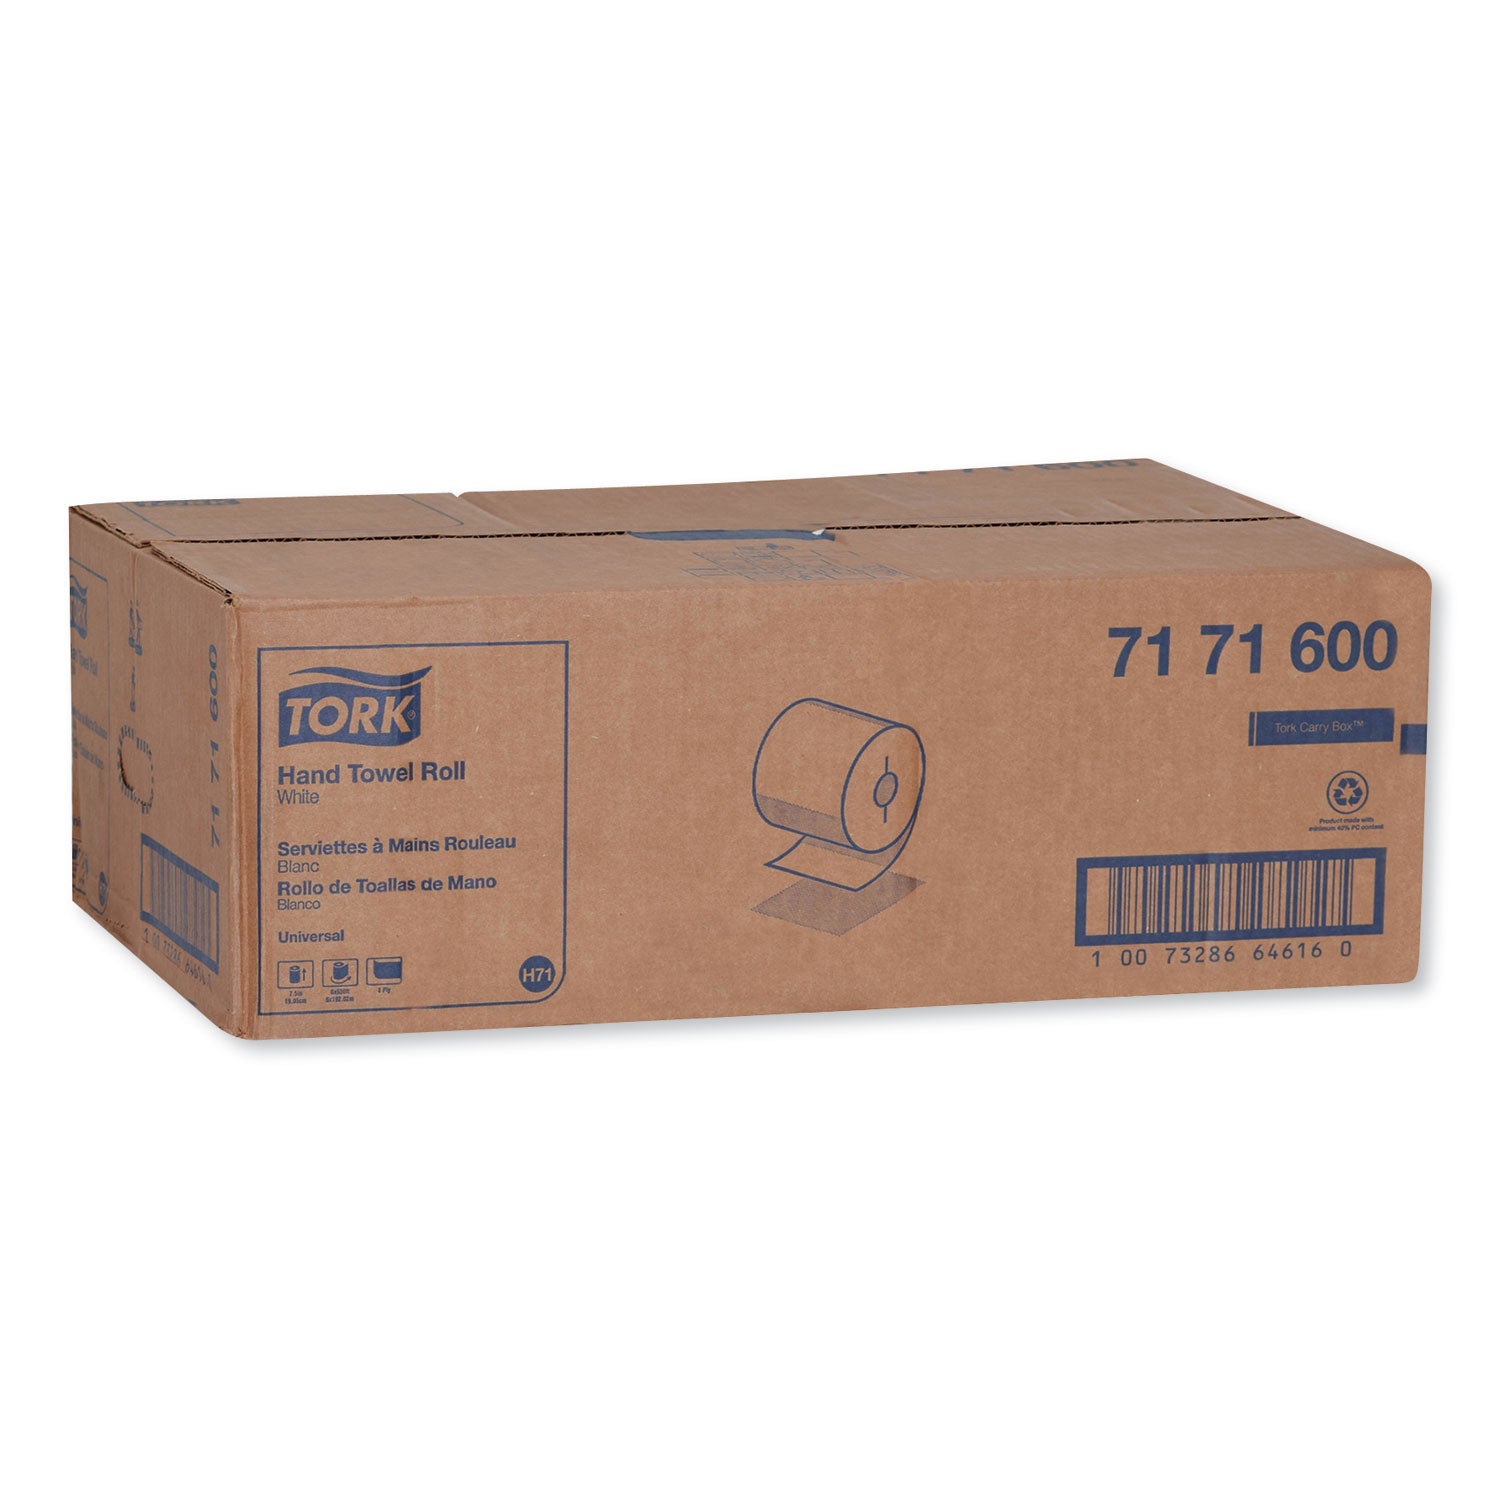 universal-hand-towel-roll-notched-1-ply-75-x-10-white-756-roll-6-carton_trk7171600 - 2